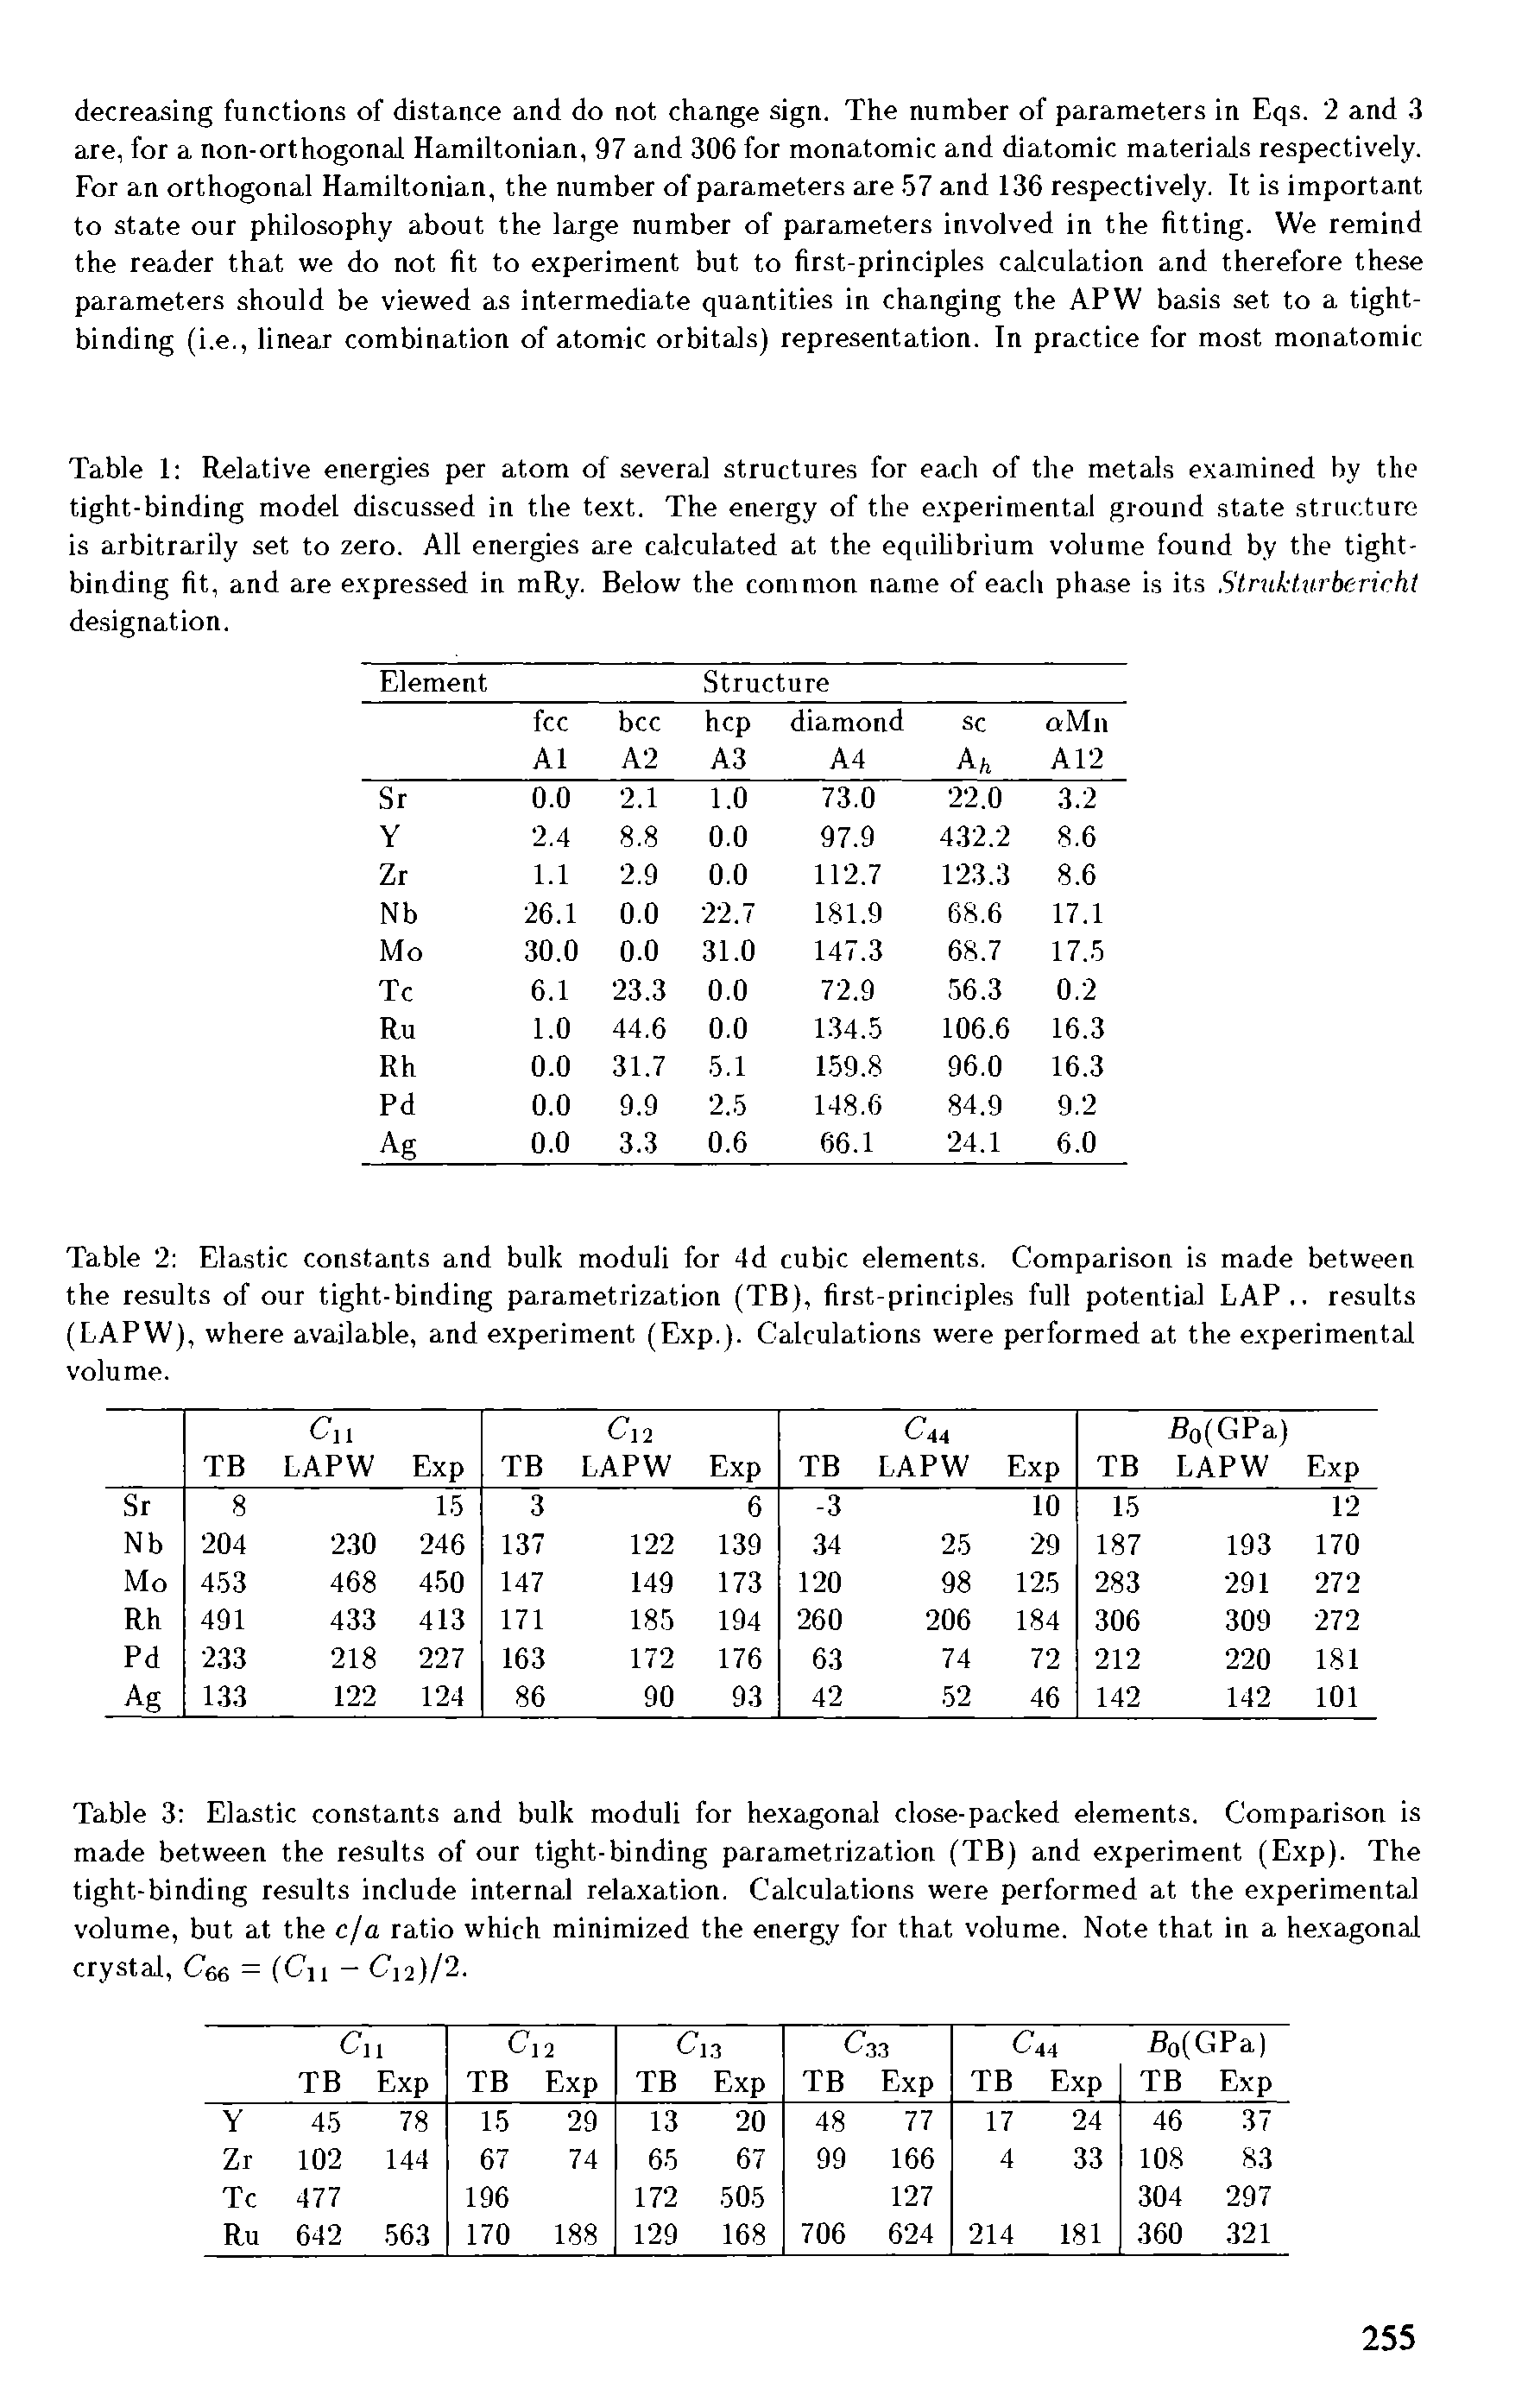 Table 1 Relative energies per atom of several structures for each of the metals examined by the tight-binding model discussed in the text. The energy of the experimental ground state structure is arbitrarily set to zero. All energies are calculated at the equihbrium volume found by the tight-binding fit, and are expressed in mRy. Below the common name of eacli phase is its Struldtirberirht designation.